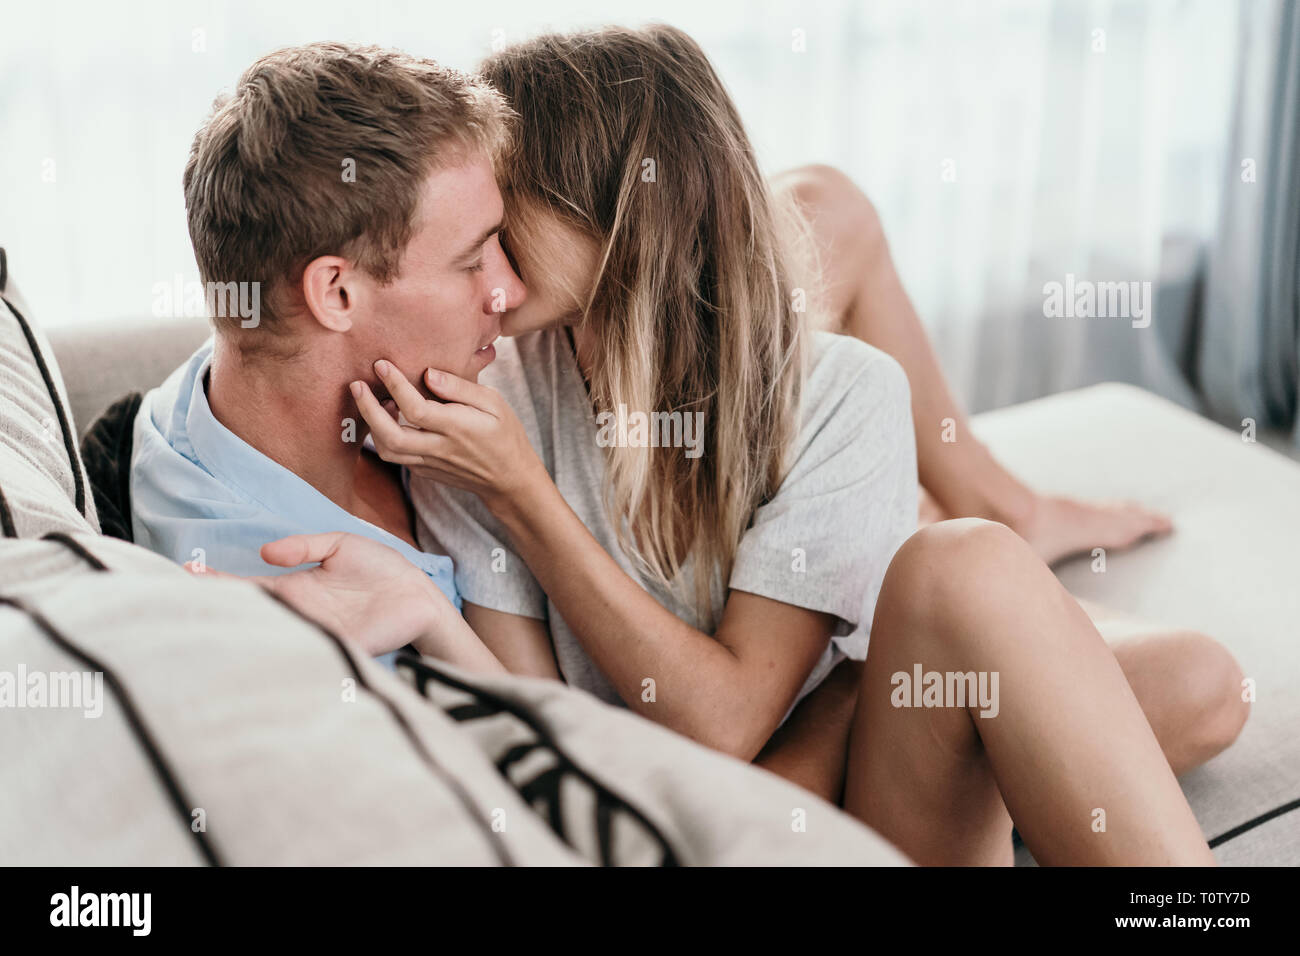 The concept of tenderness and affection Stock Photo